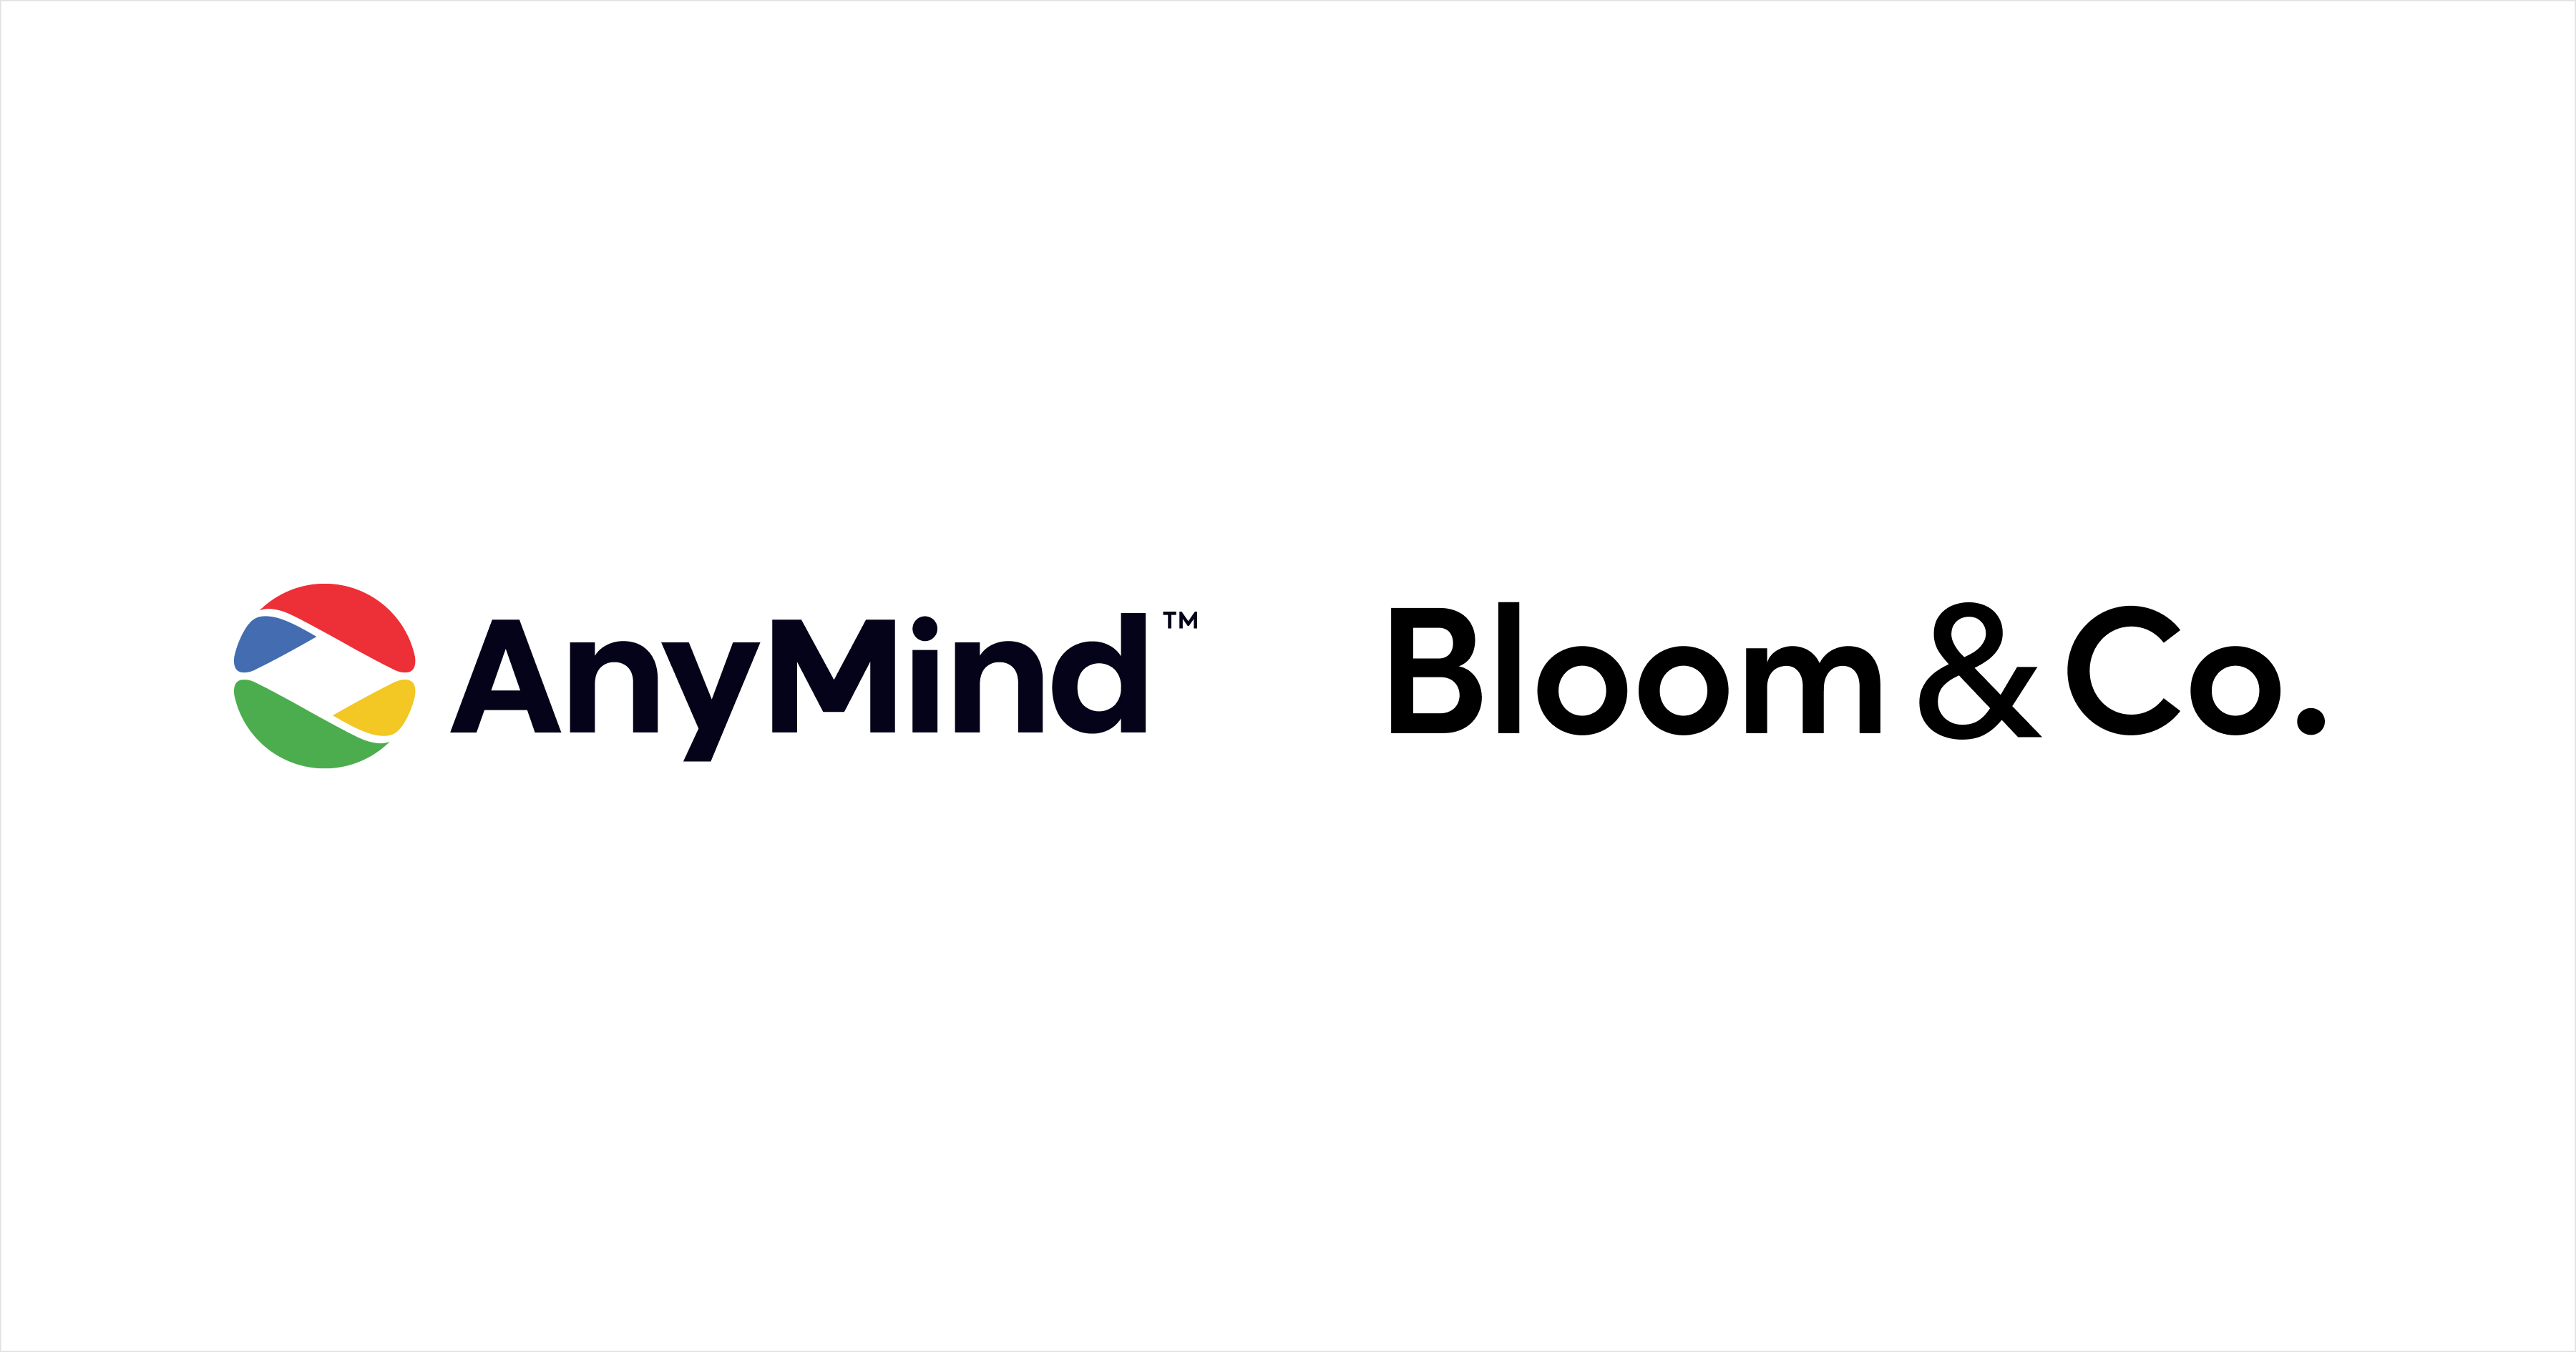 Bloom Co Group Partners With Anymind Group To Boost Support From Marketing To Supply Chain Enablement For Japanese Companies Expanding Into The Asia Region Business Wire